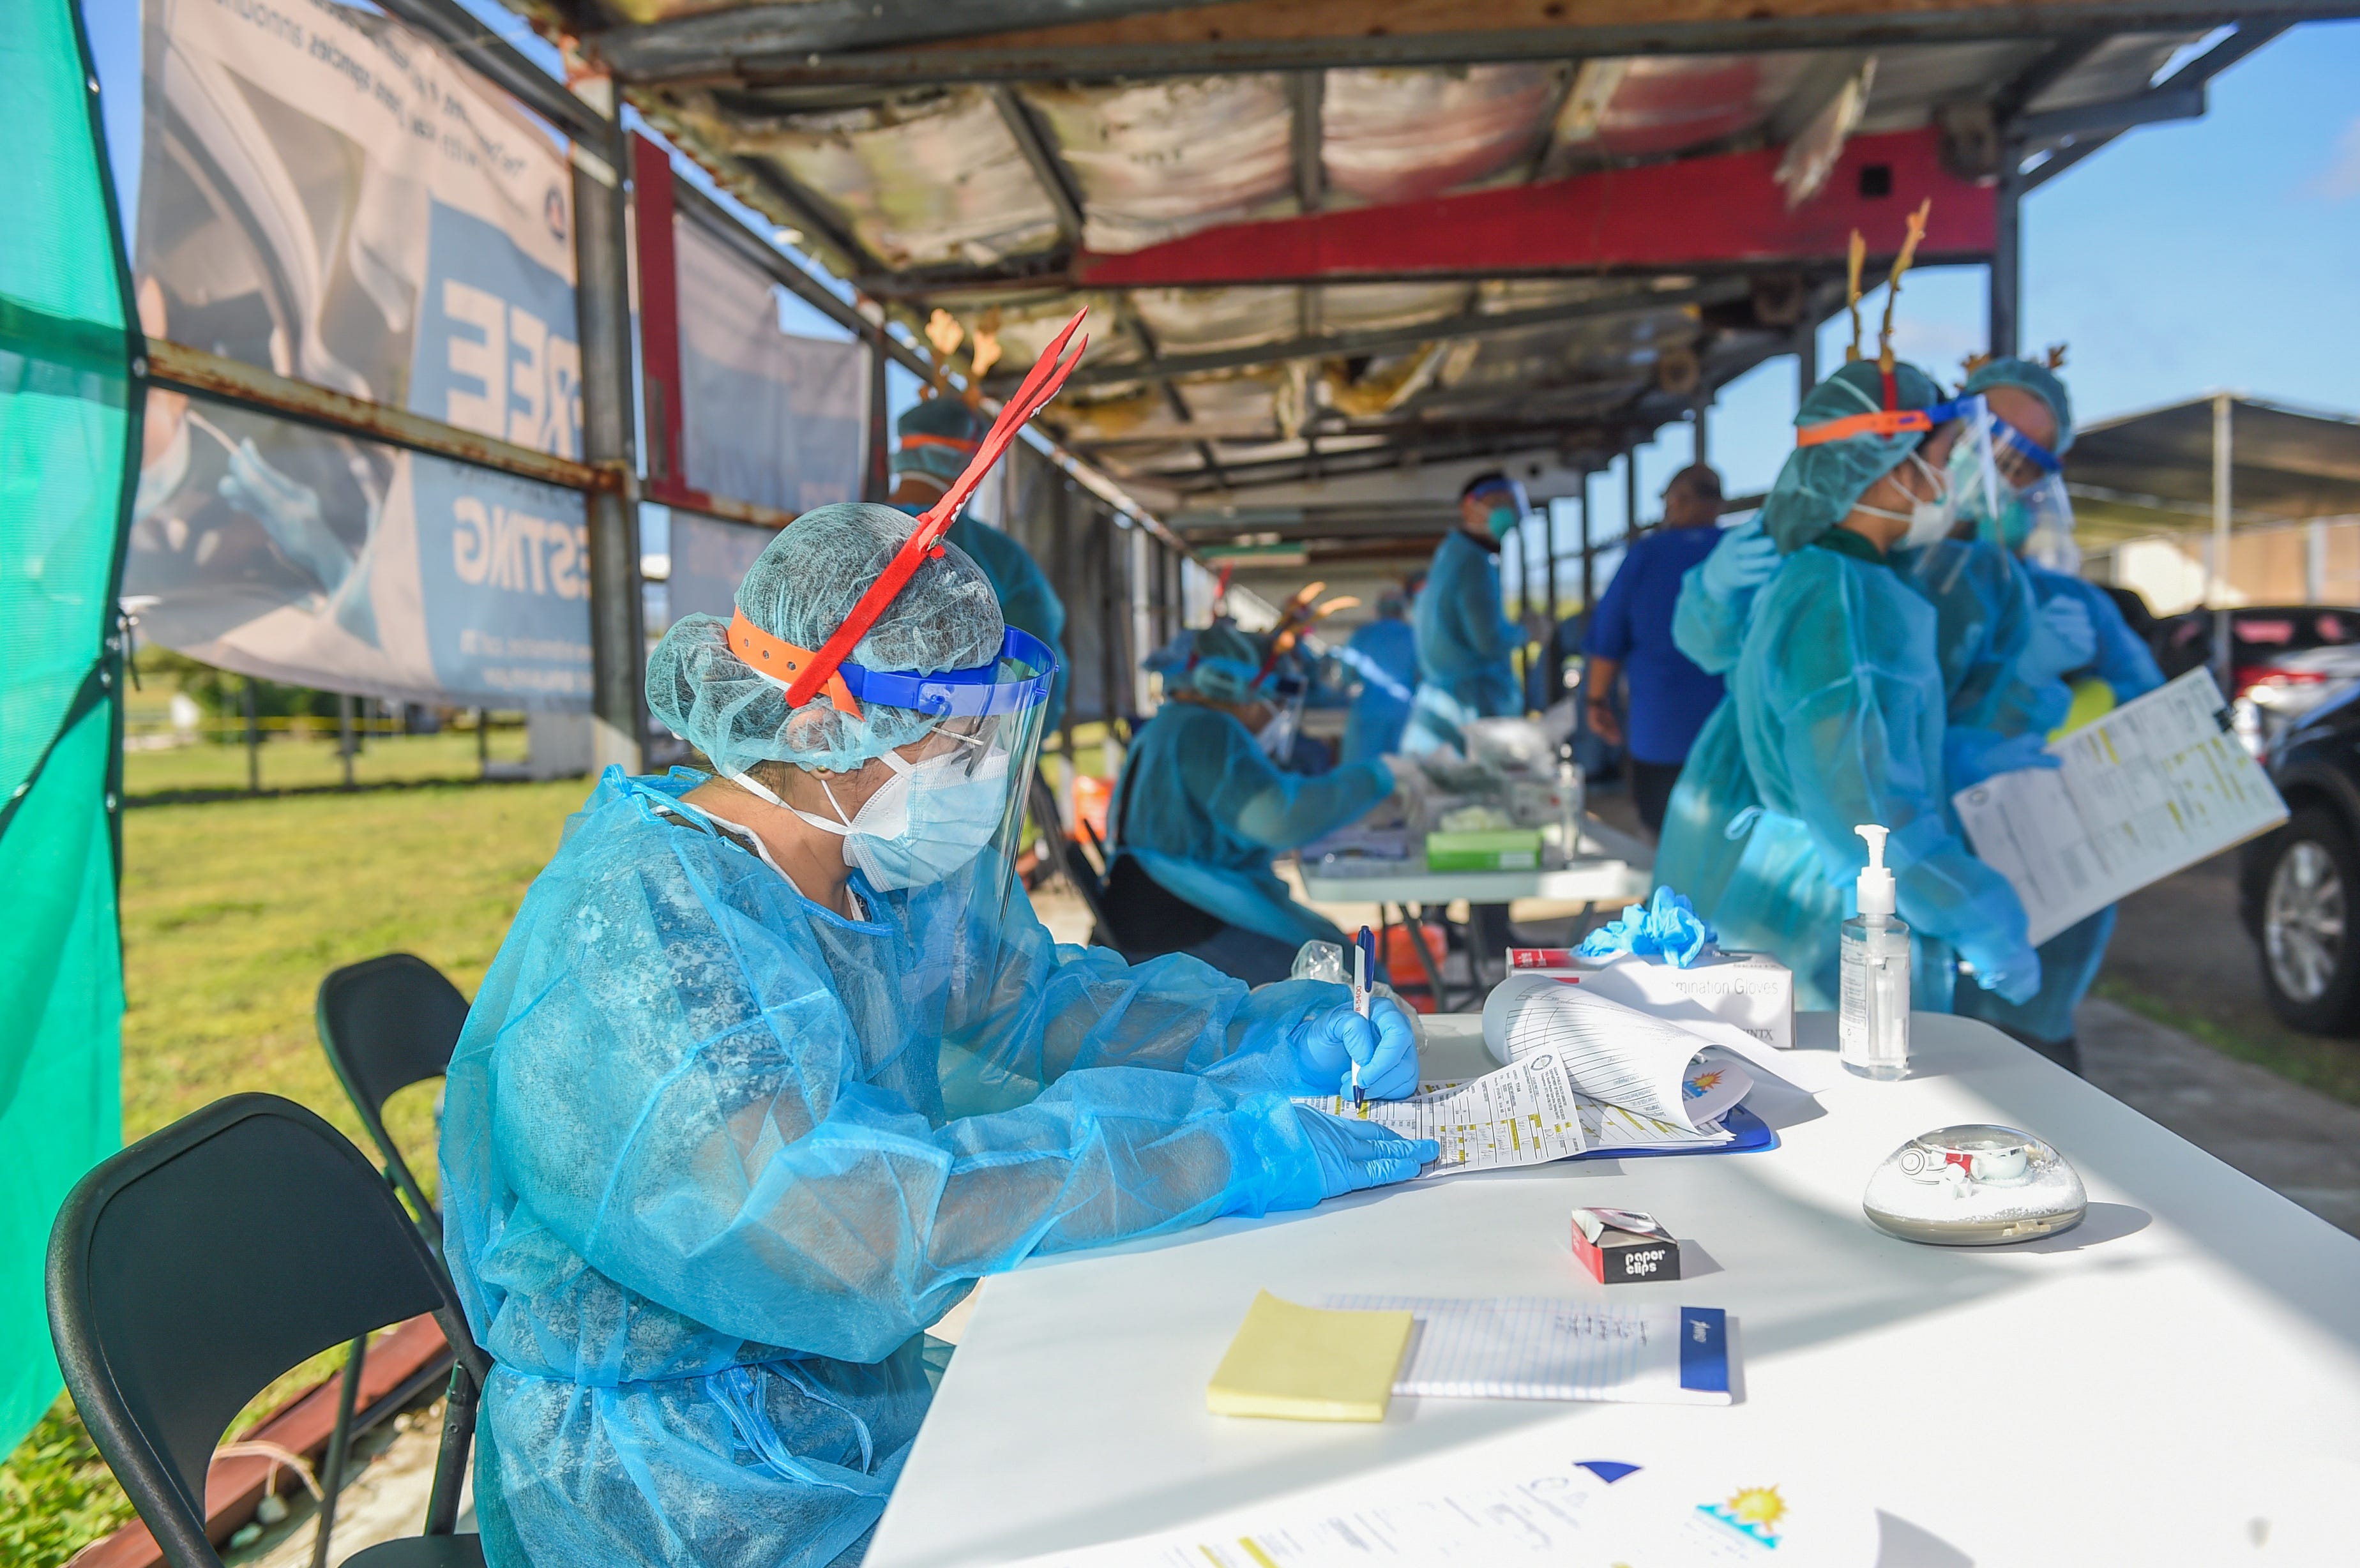 The Department of Public Health and Social Services conducts mass community COVID-19 testing at the Tiyan carnival grounds in this Dec. 21, 2020, file photo.